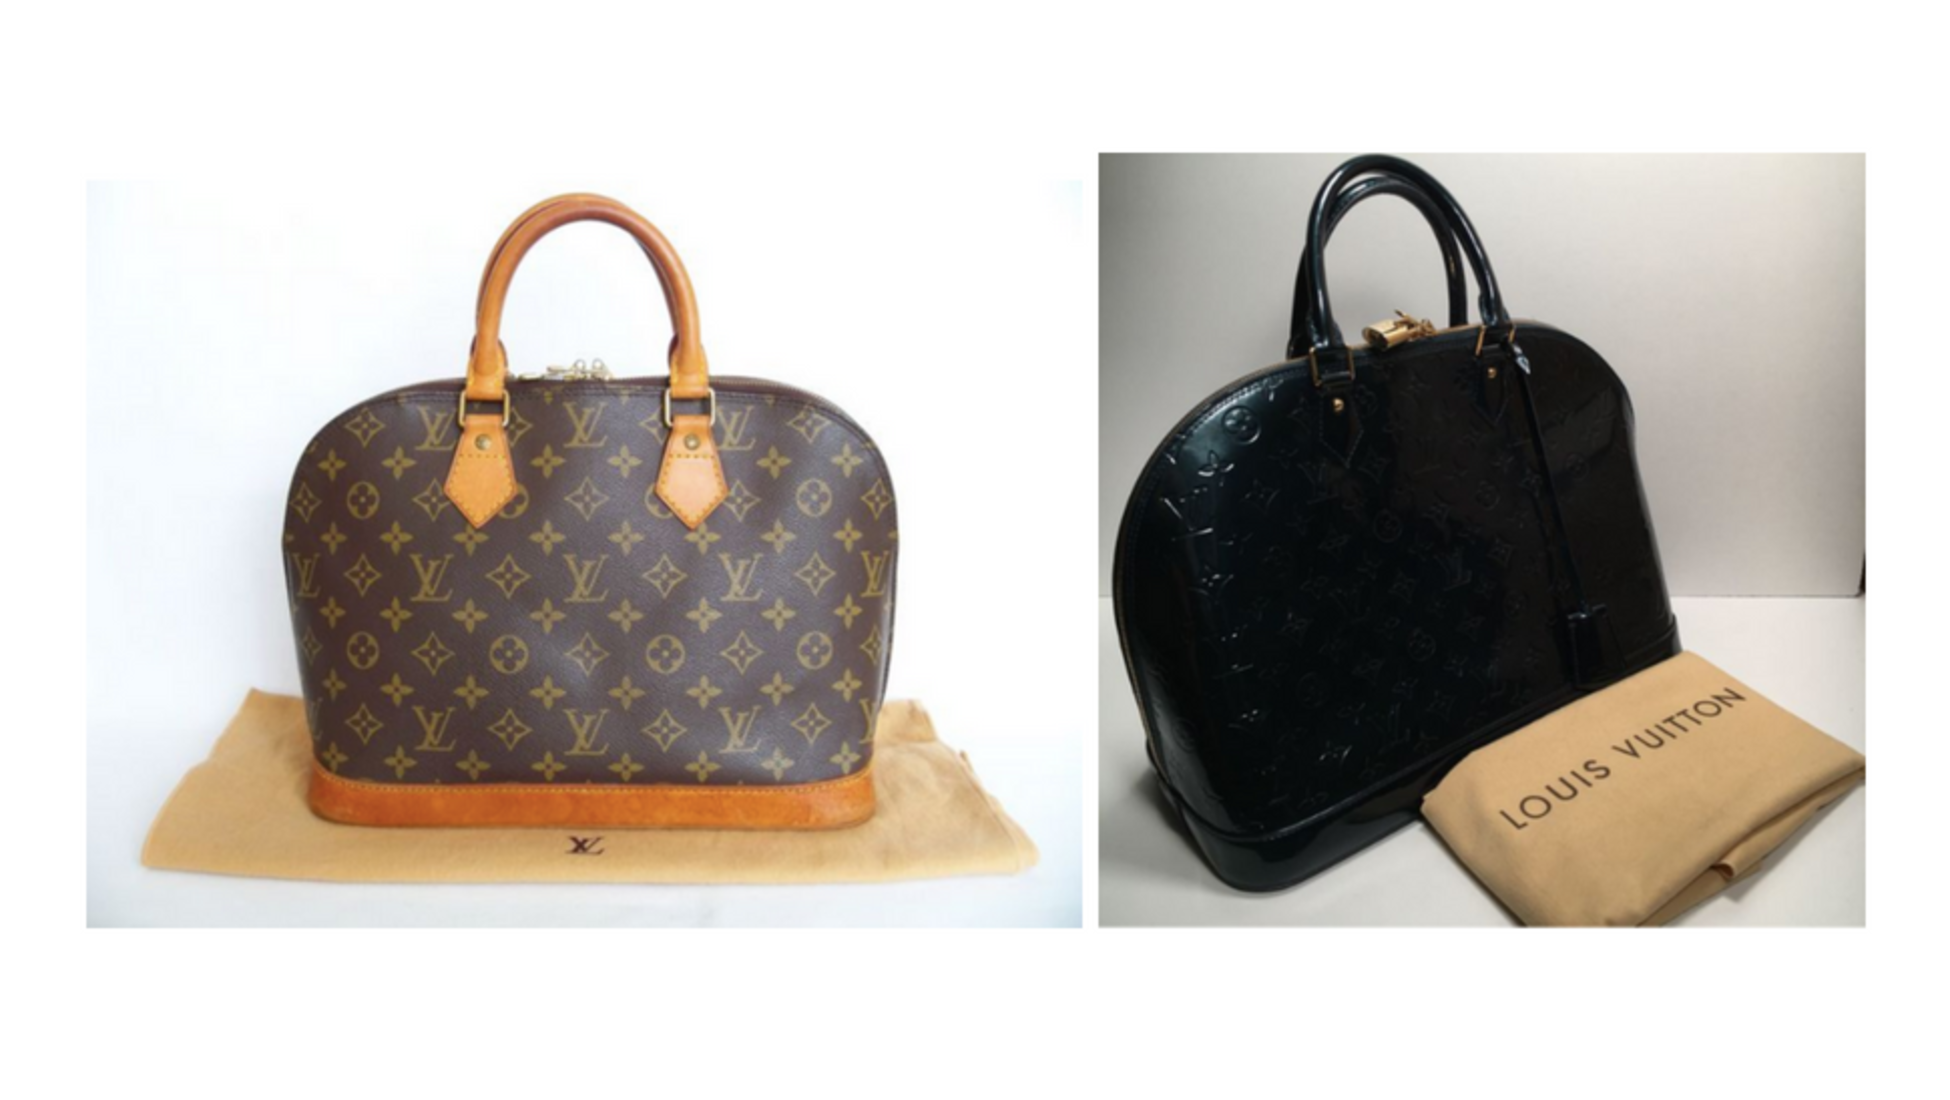 branded handbags with price